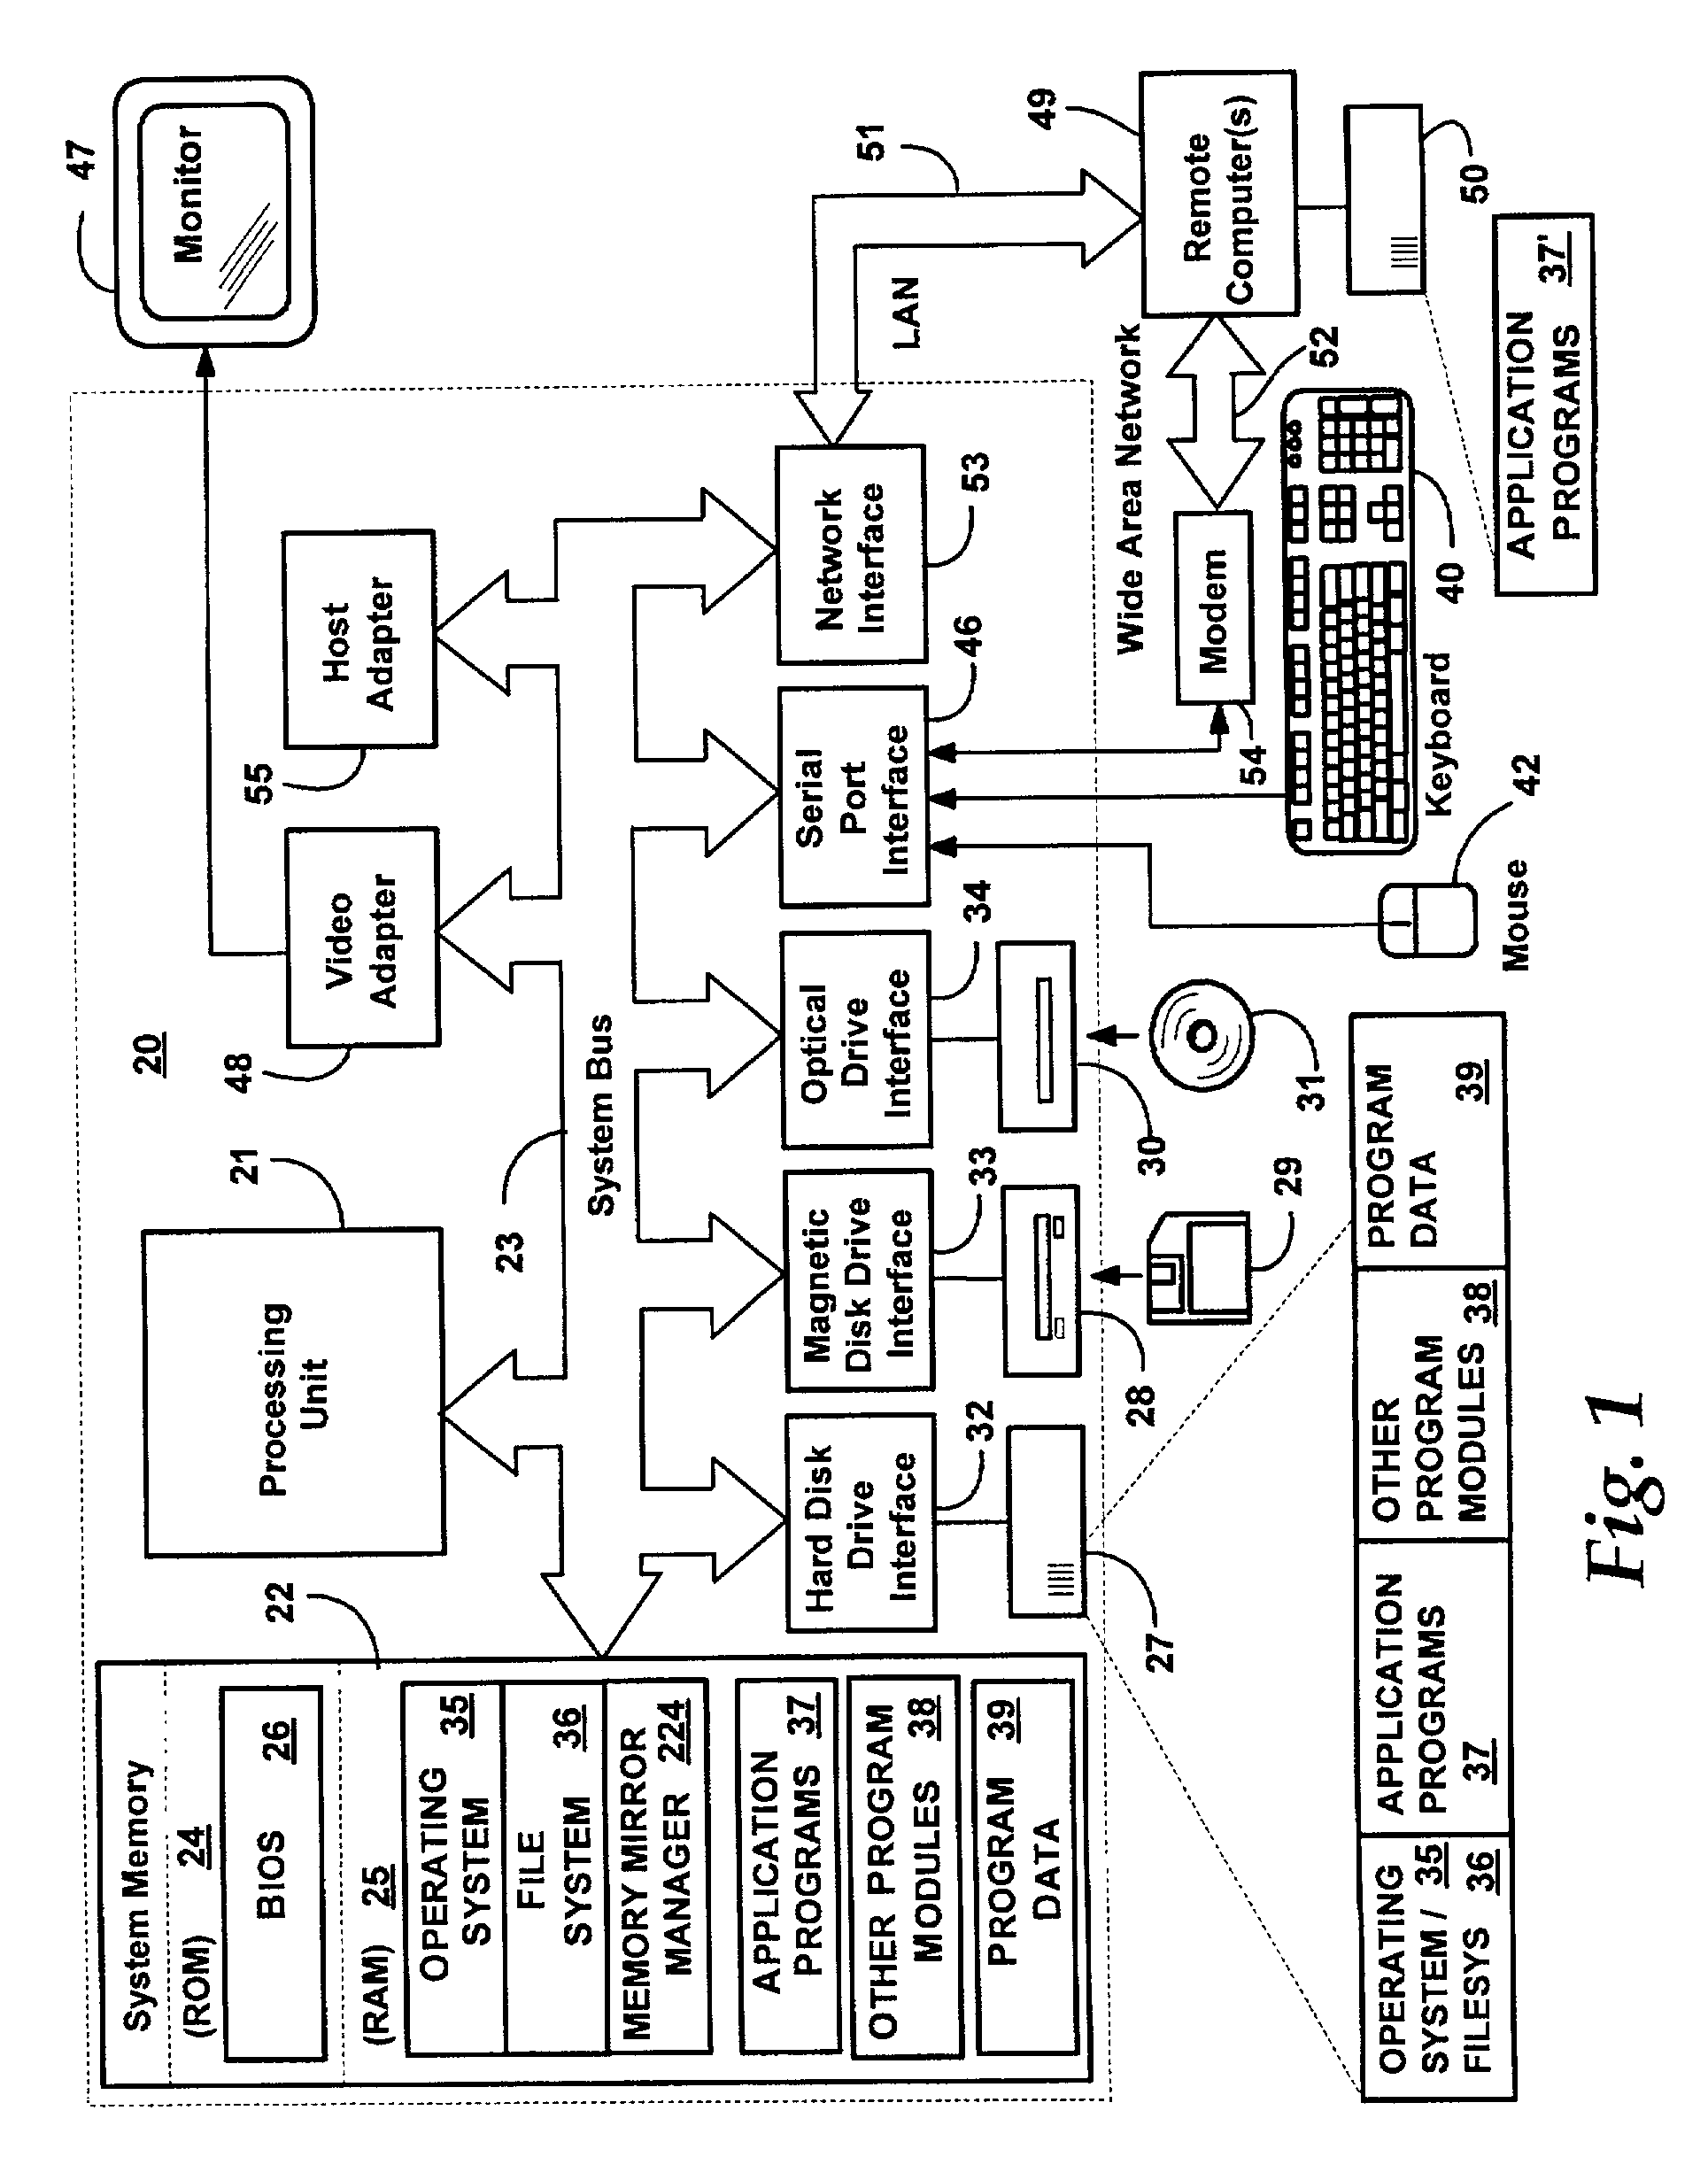 Application program interface for dynamic instrumentation of a heterogeneous program in a distributed environment